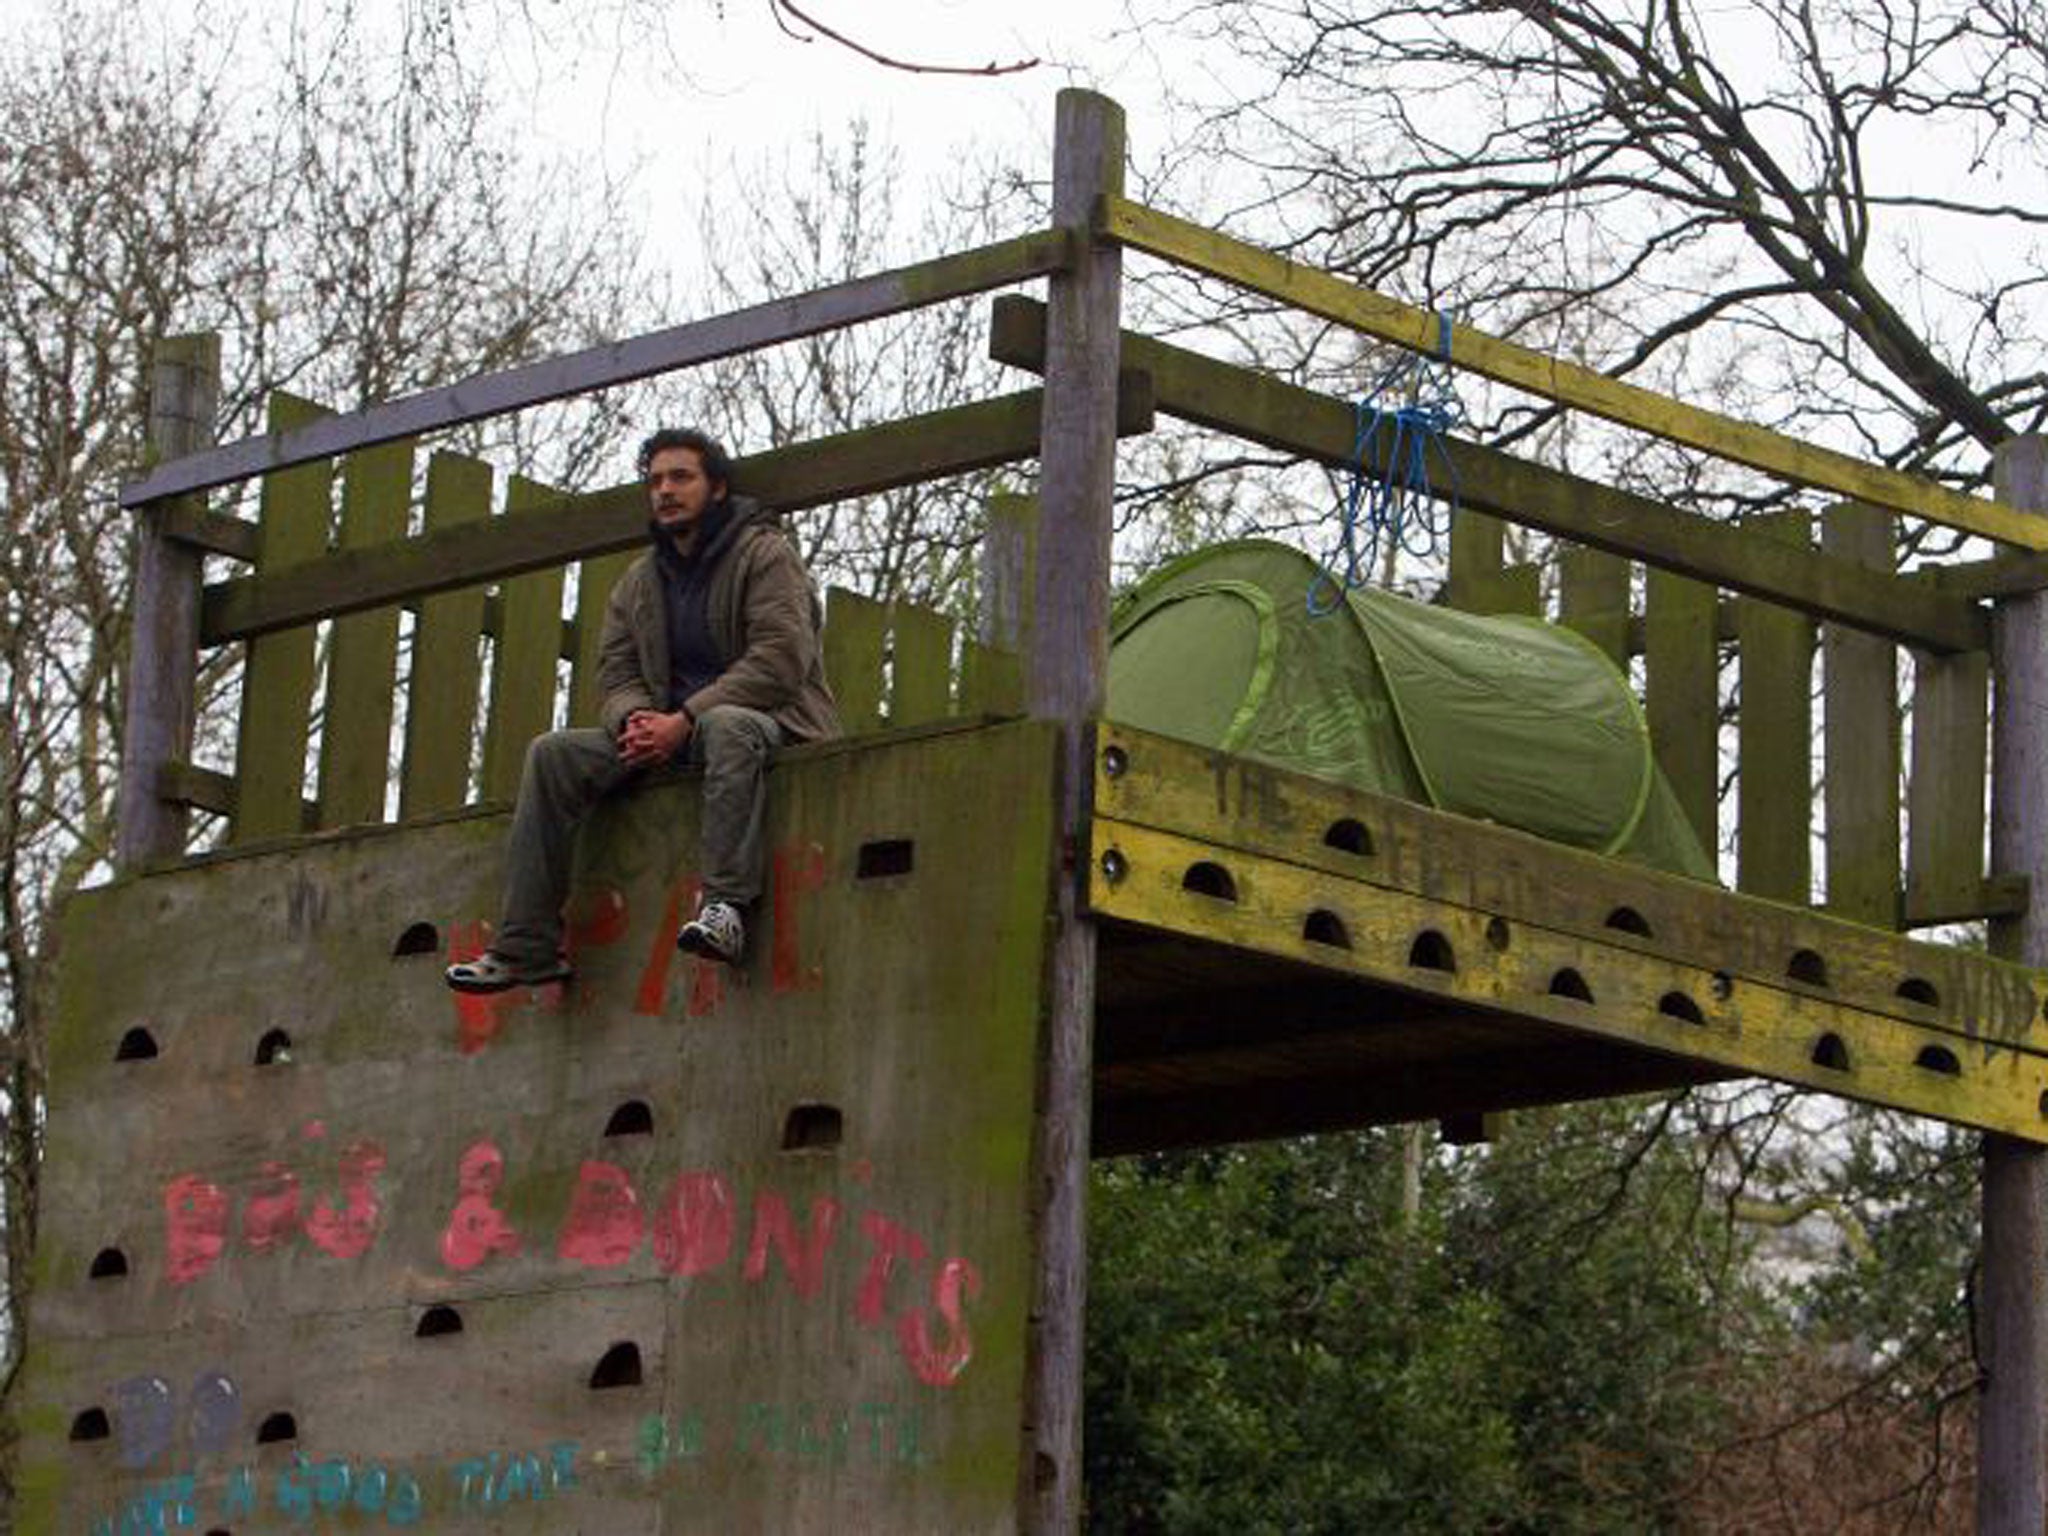 Occupy protesters have set up a camp to try to halt staffing cuts at Battersea Park